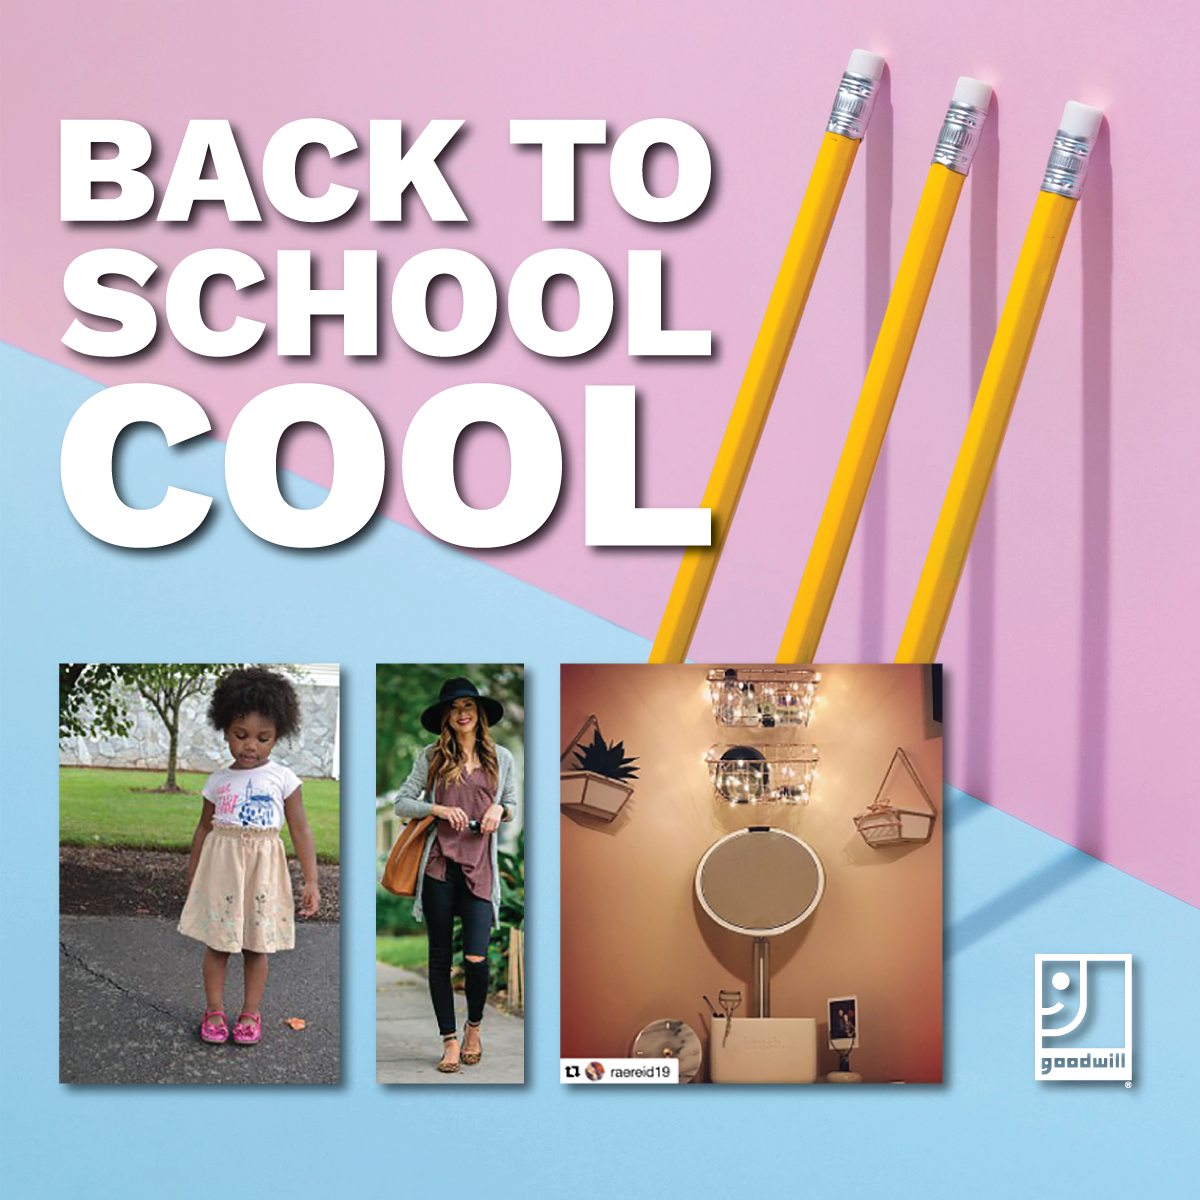 Back to School Cool